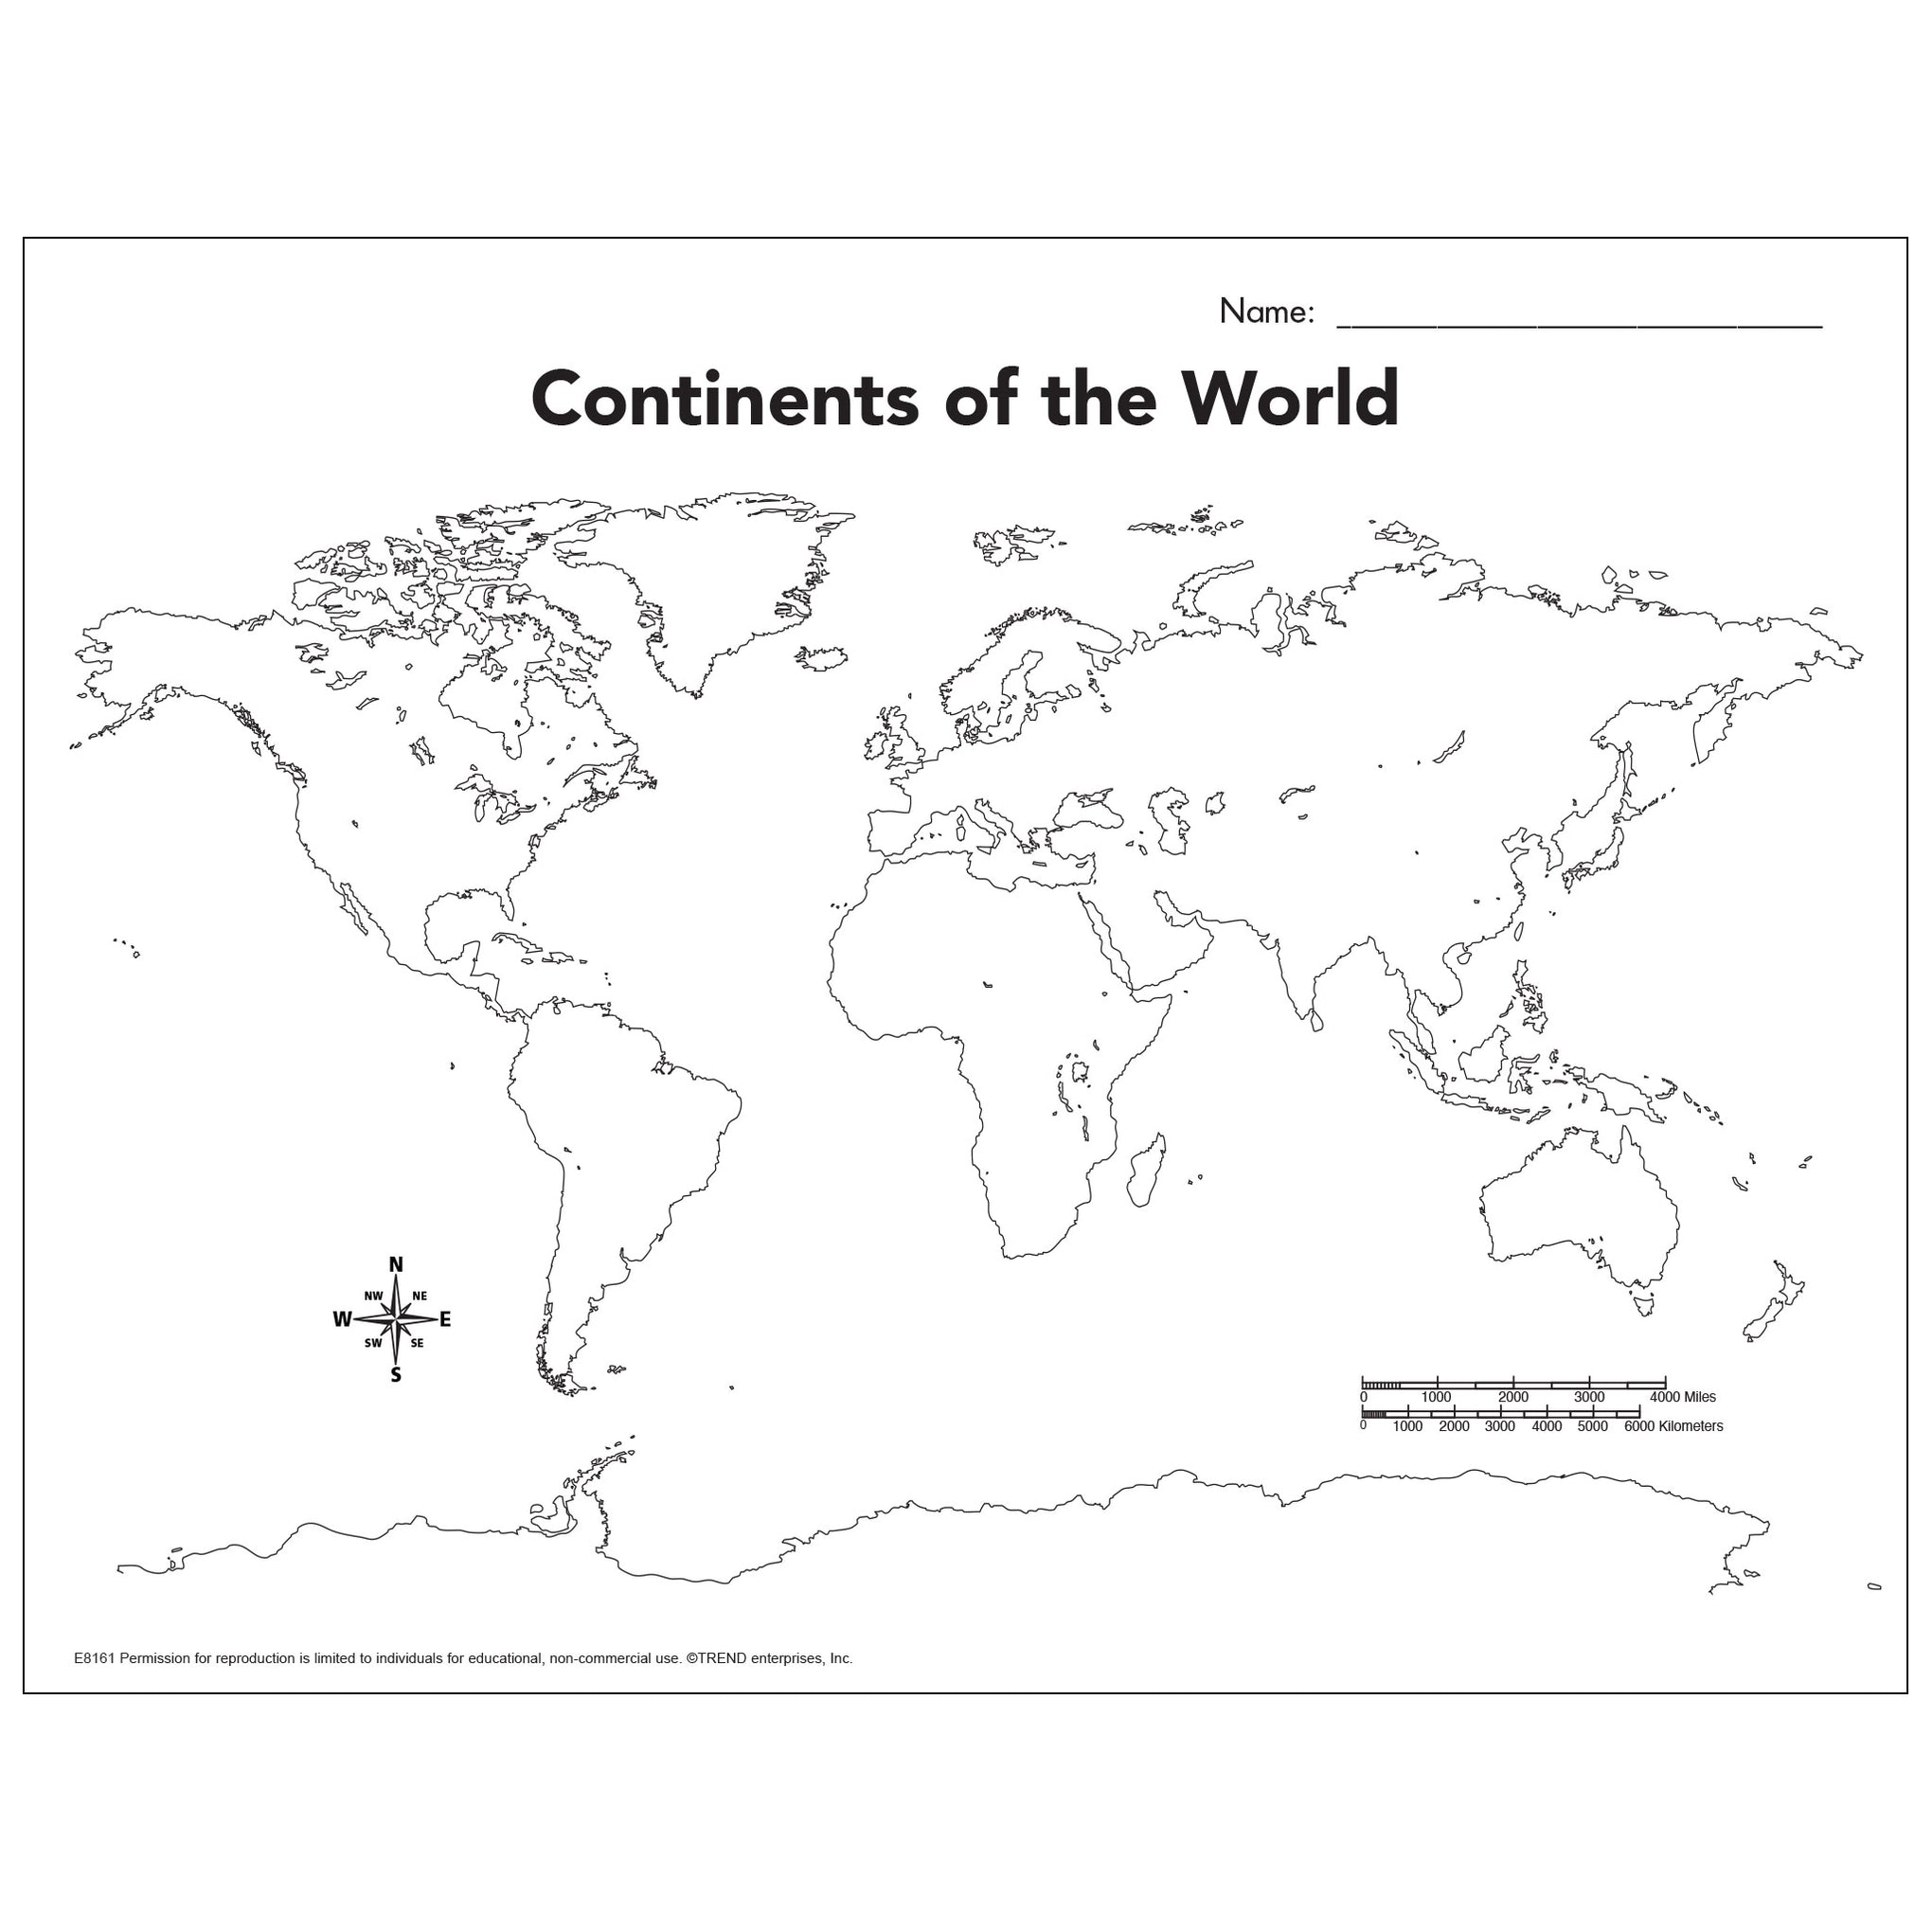 Continents of the World Blank Map Project Sheet Free Printable | TREND ...